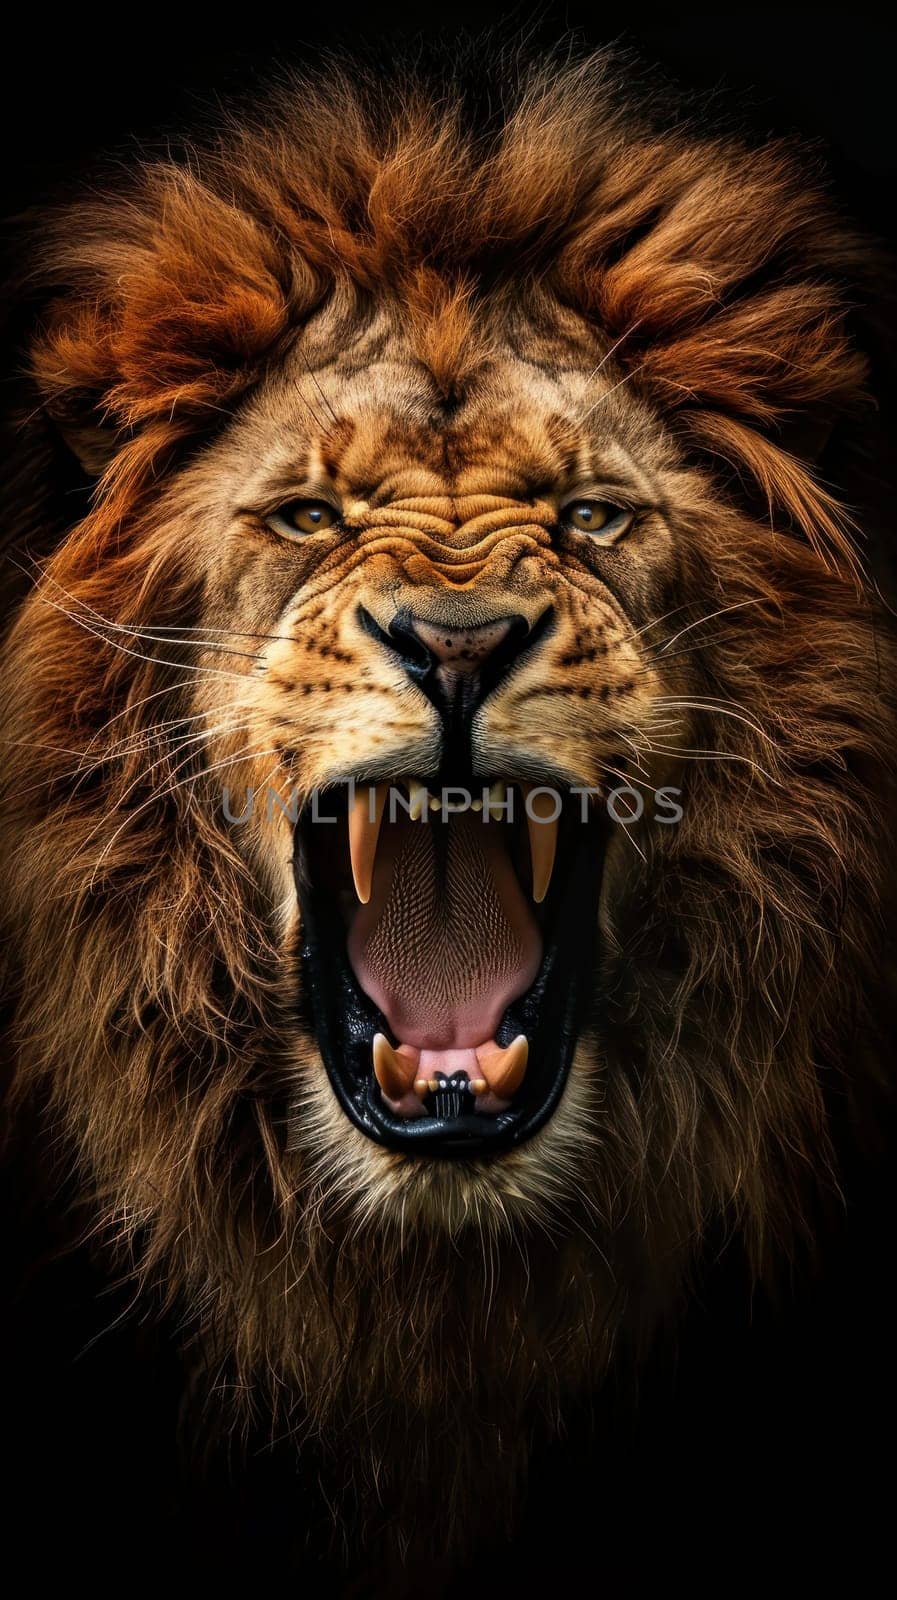 A lion with its mouth open and teeth bared by golfmerrymaker